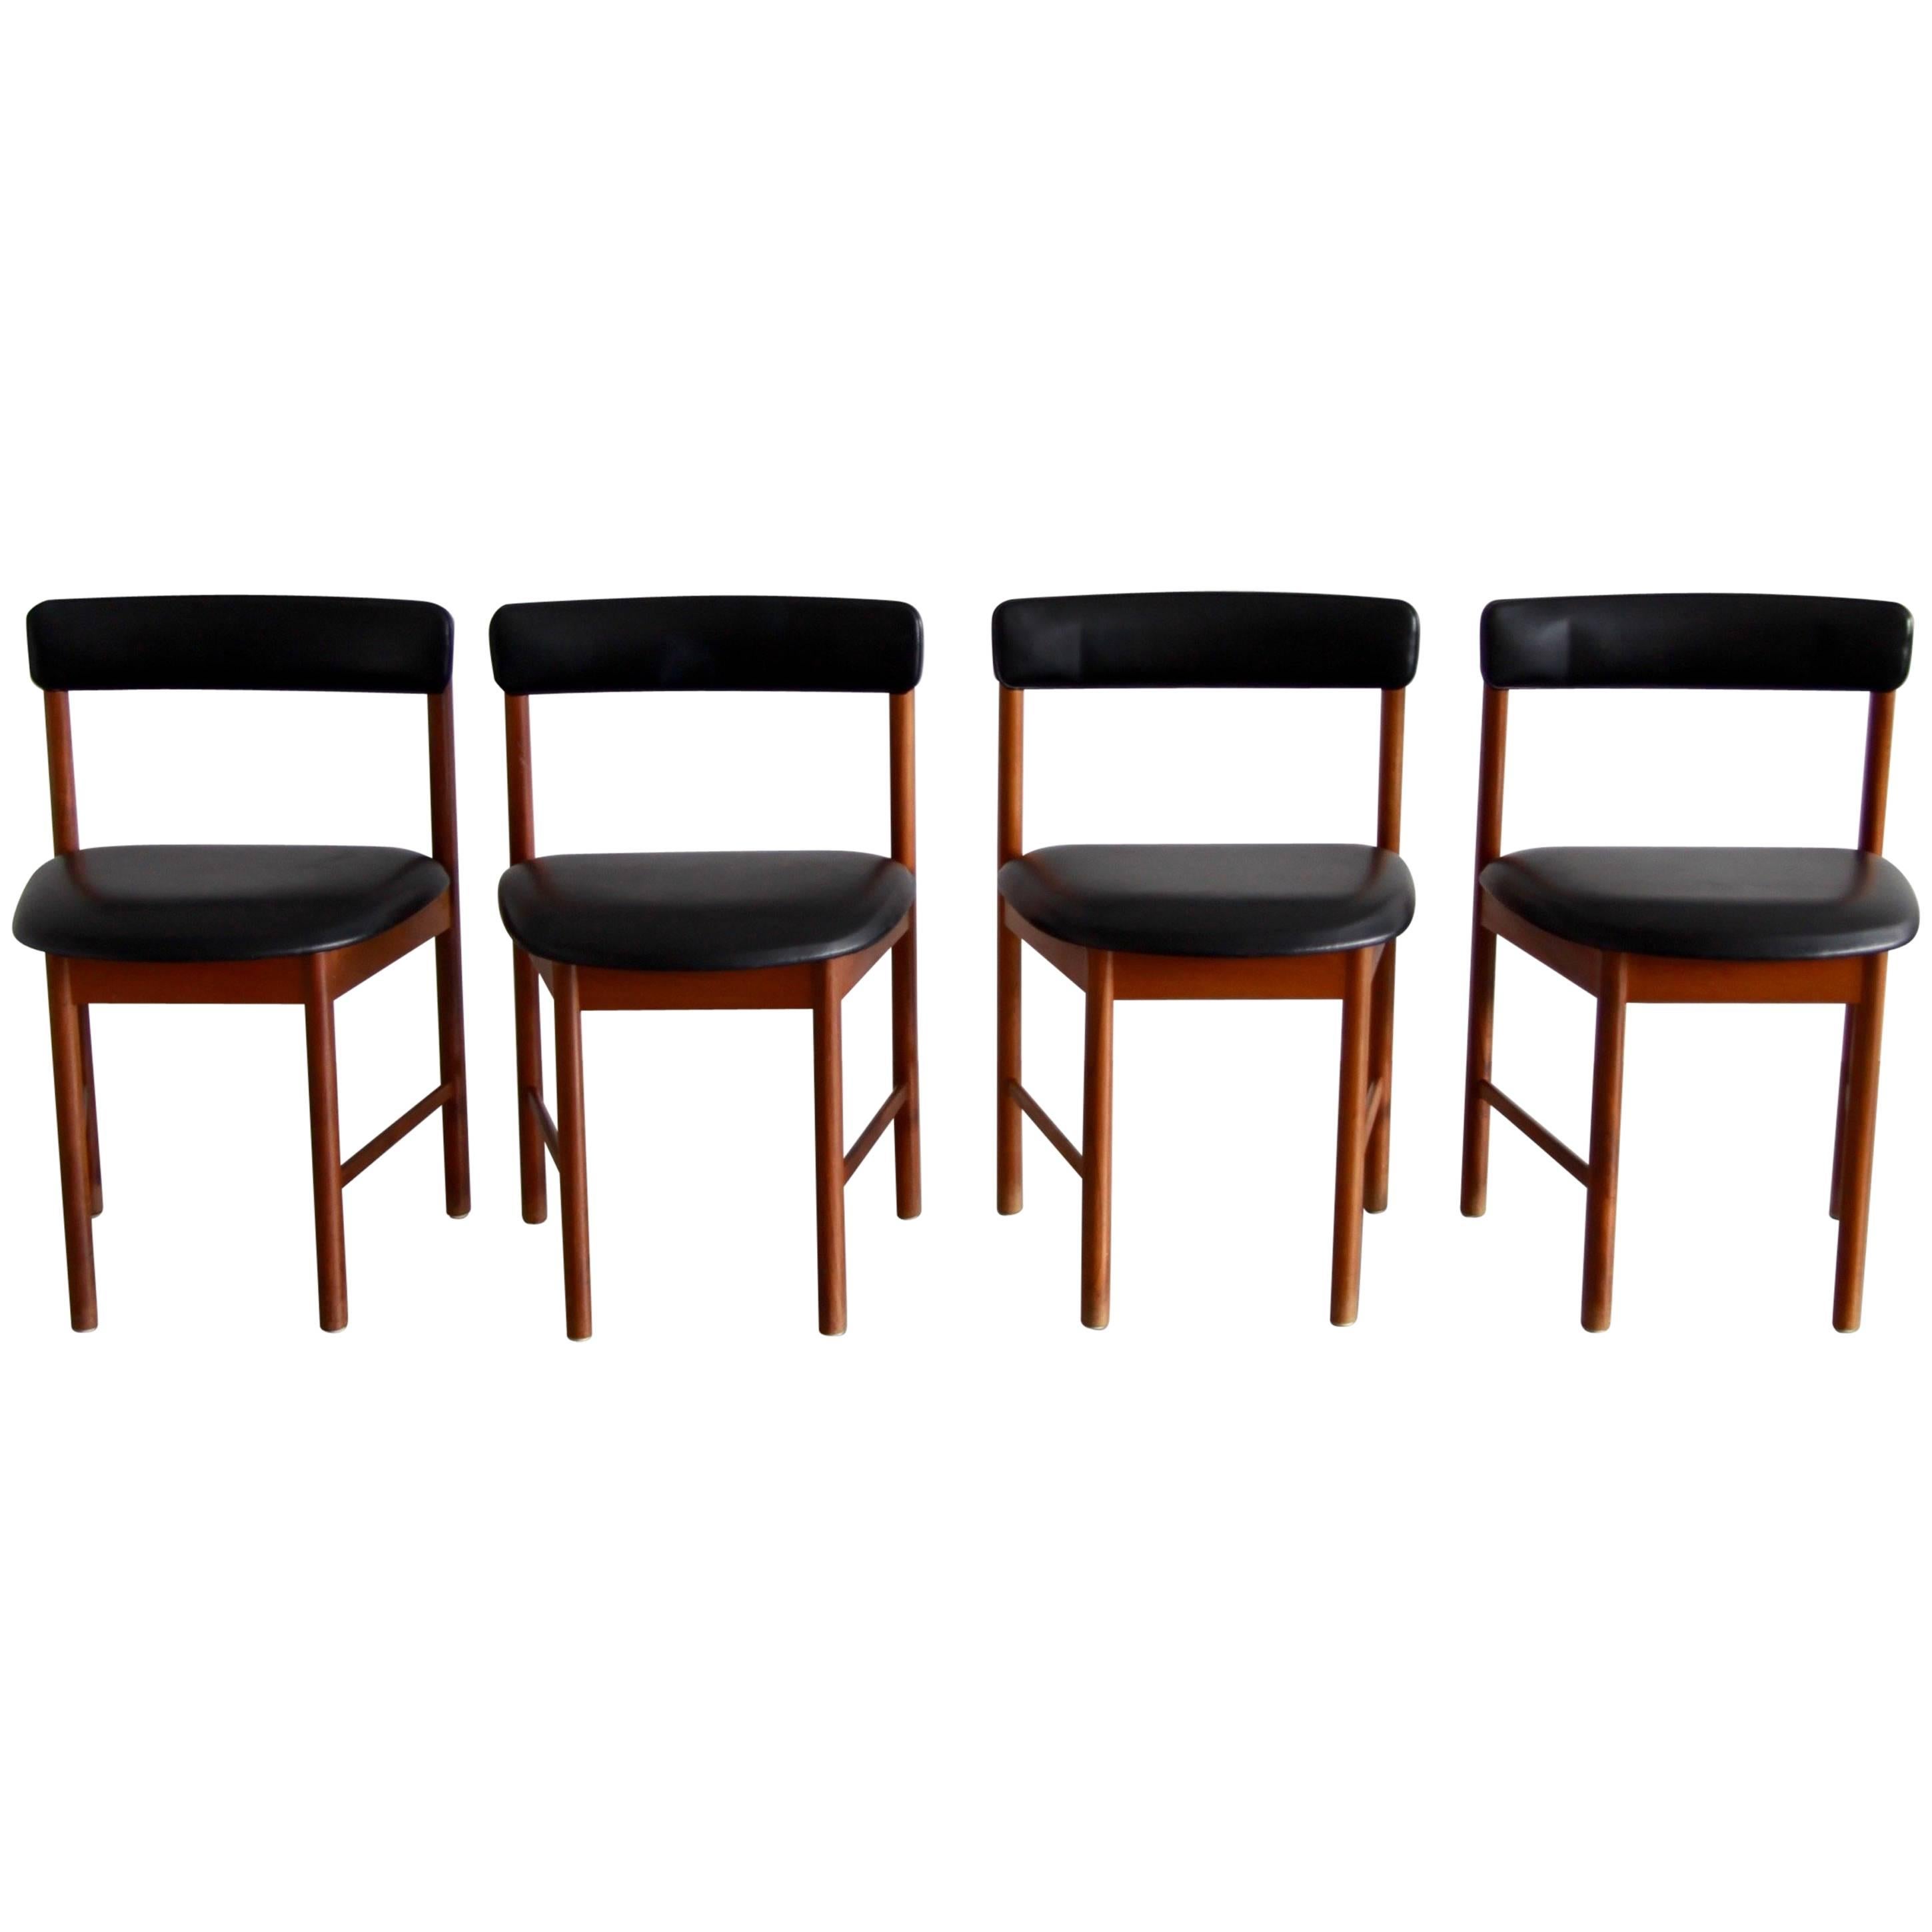 McIntosh Teak Dining Chairs, No 4103, 1960s, Set of Four For Sale